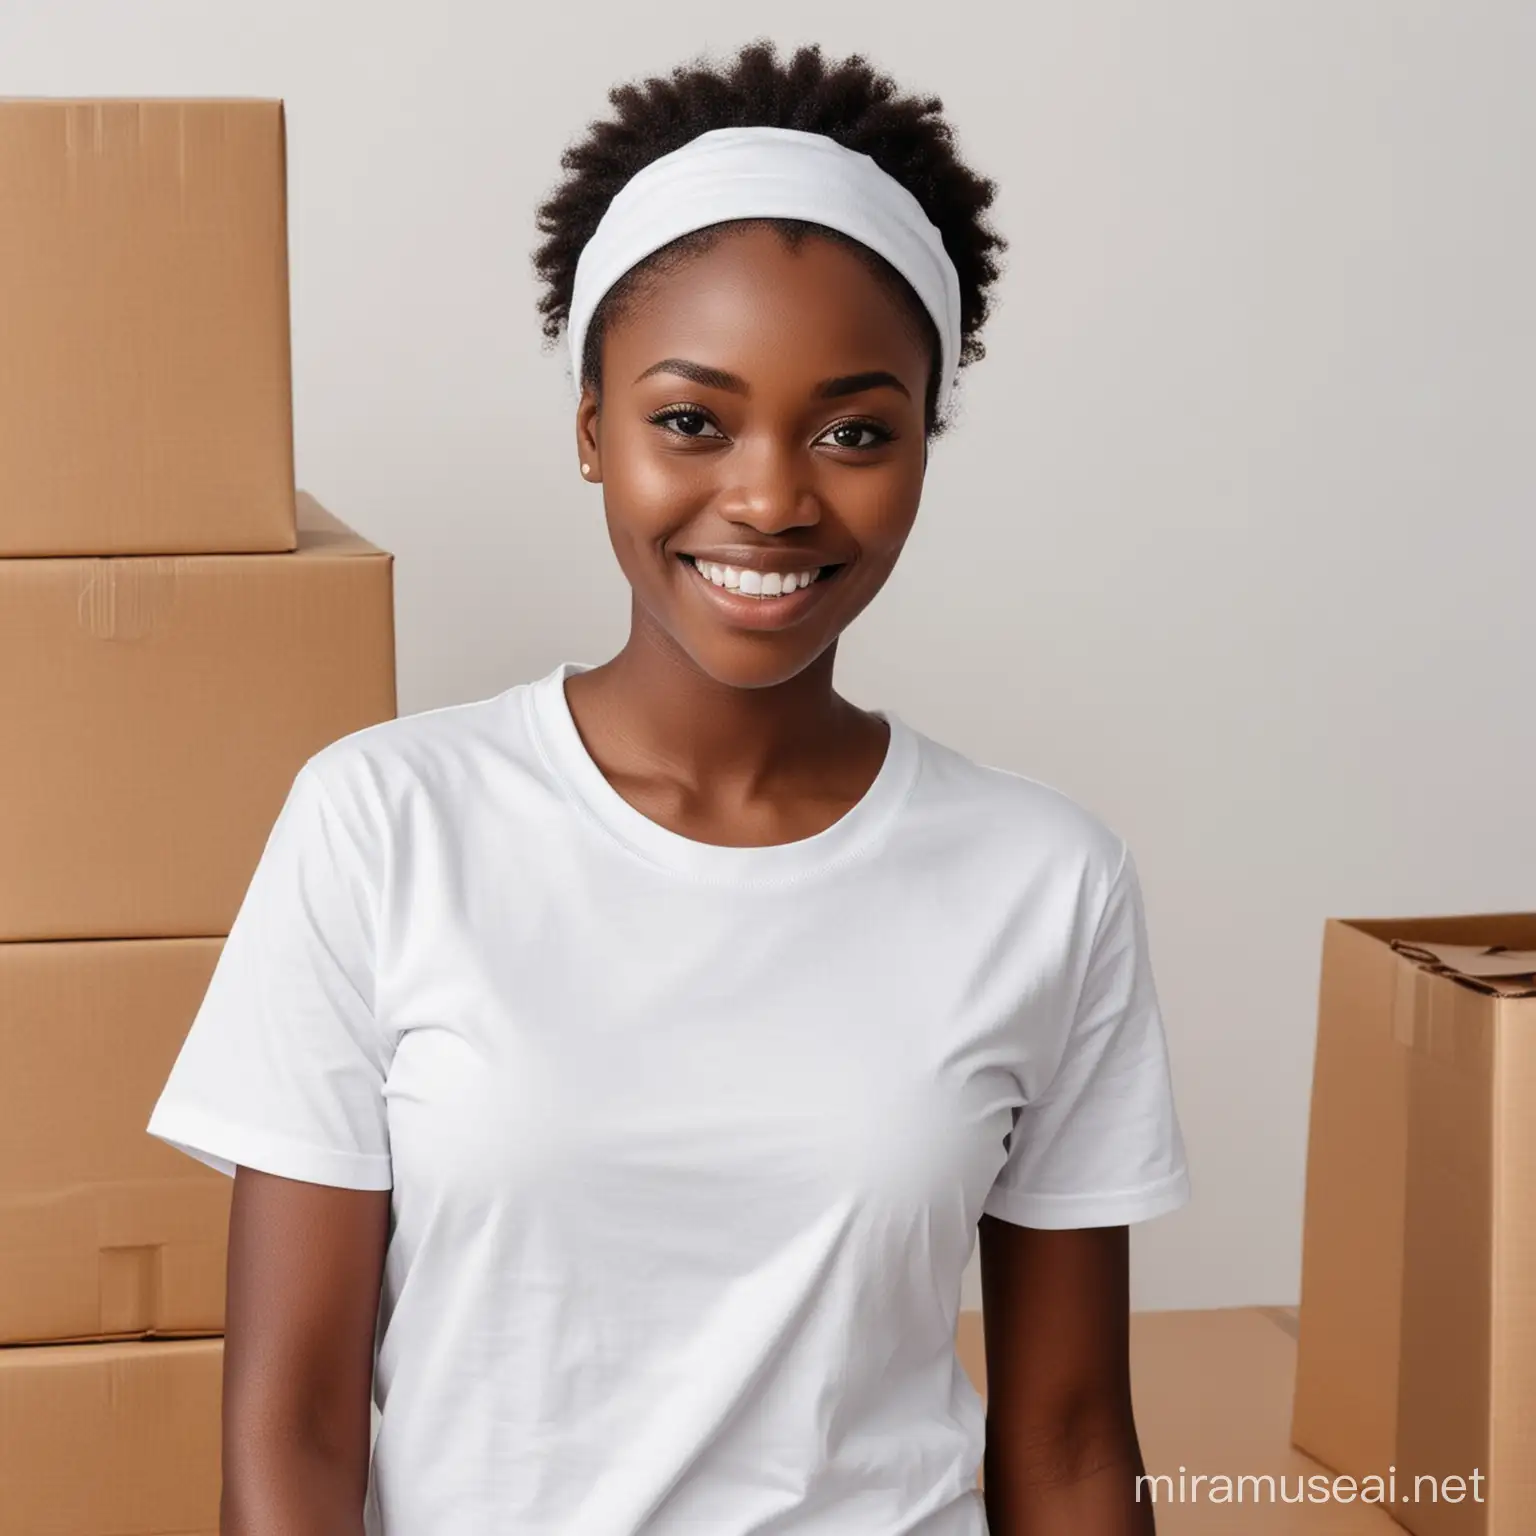 An African delivery lady wearing a white t shirt holding a package

